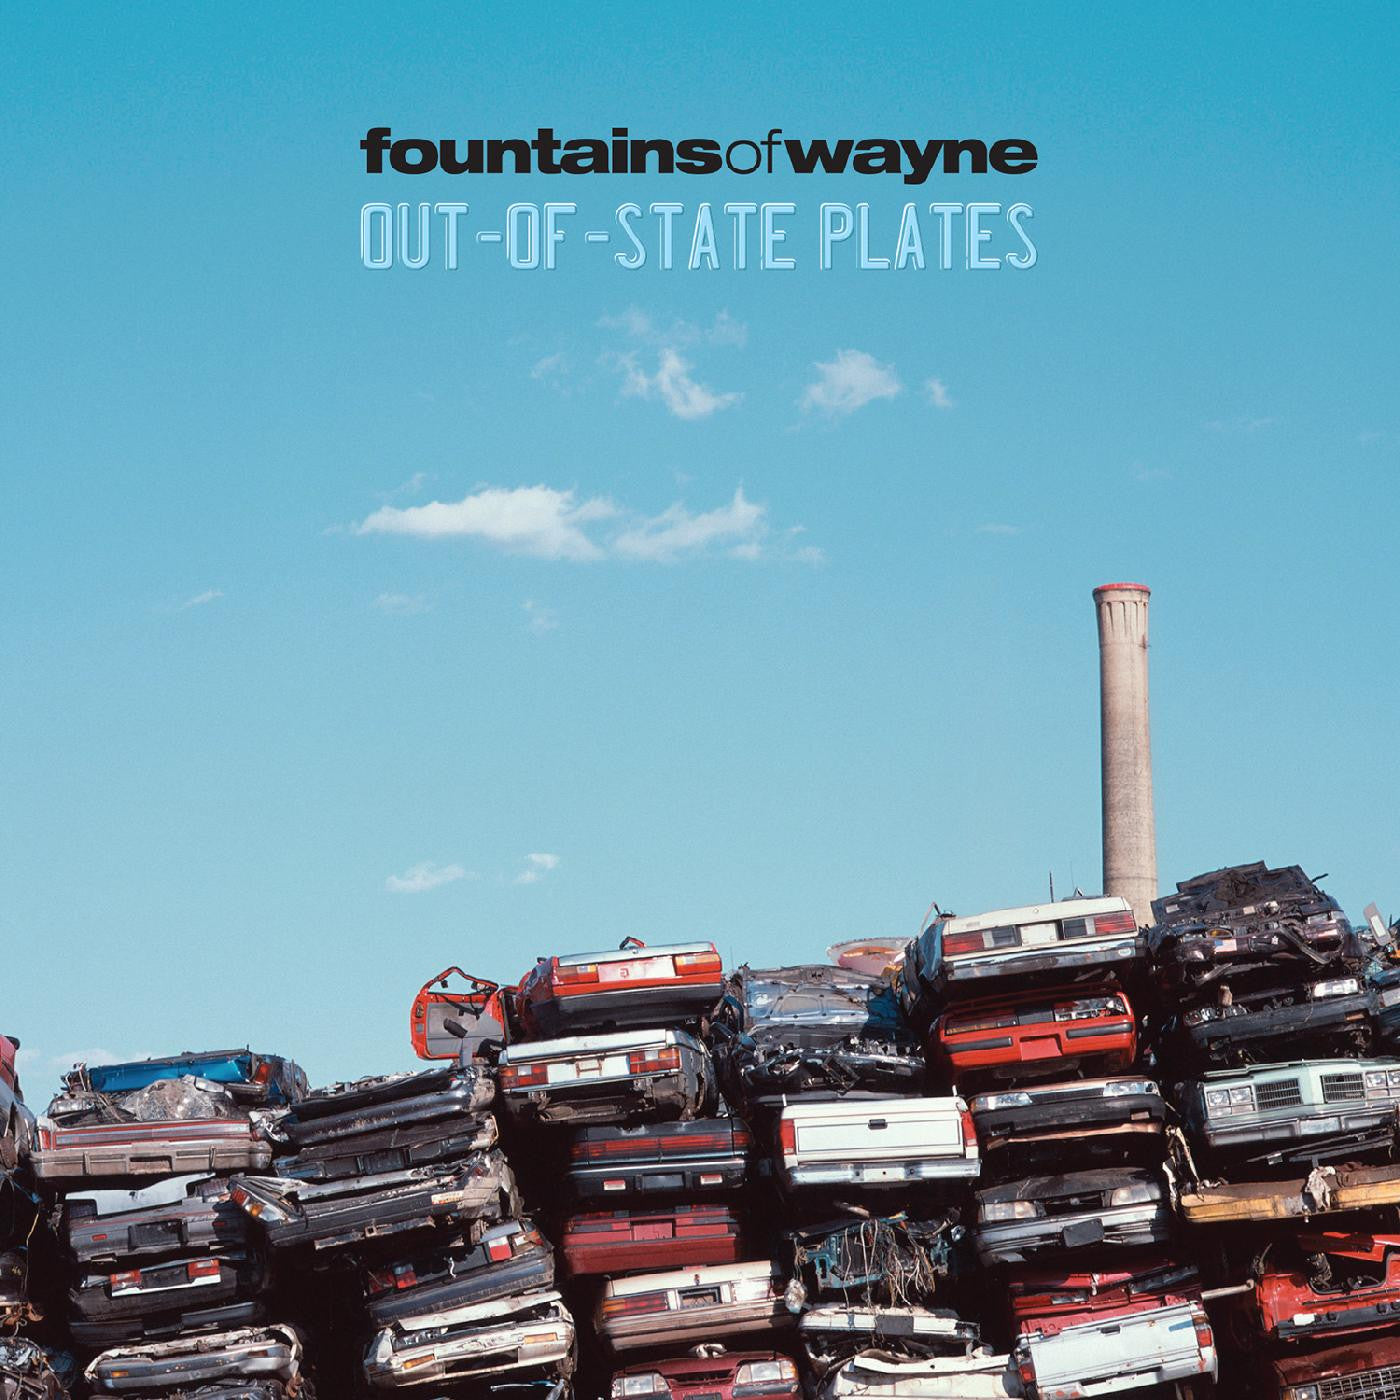 Fountains of Wayne - Out-of-State Plates (Vinyl 2LP)